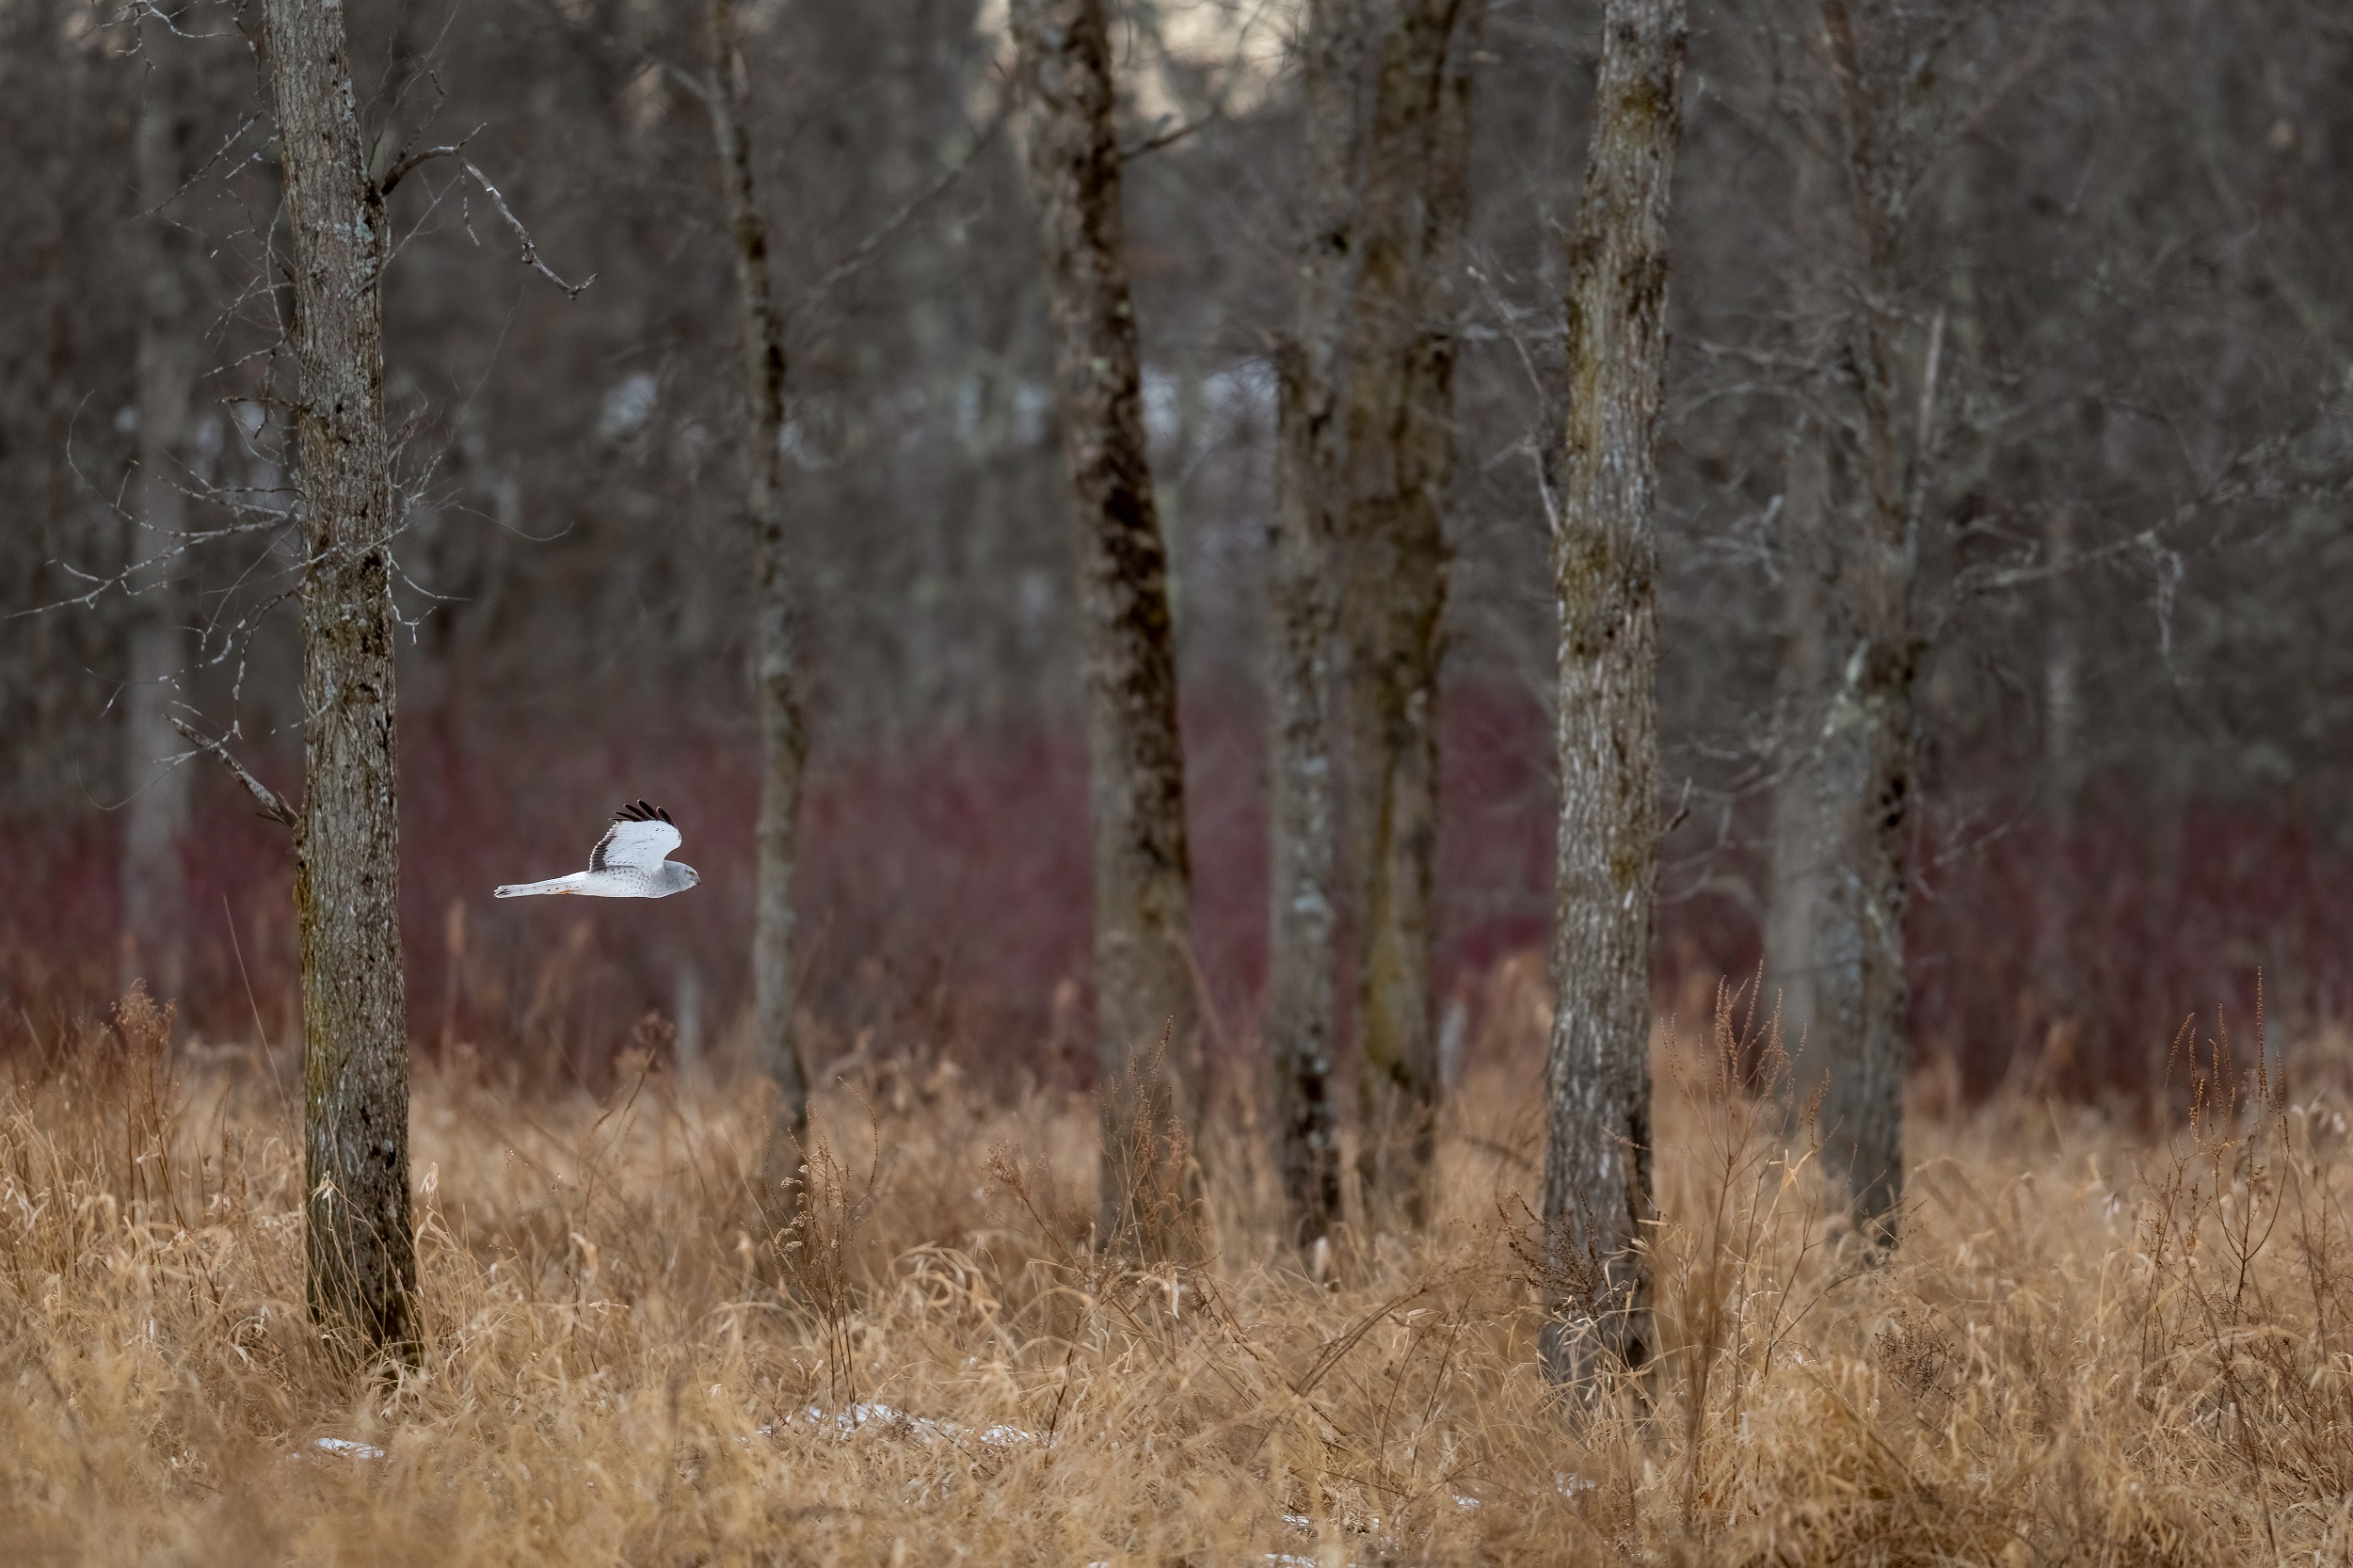 a wide-ish photo of a stand of young trees at the edge of a field, with distinct layers in the image from bottom to top of dead winter grasses, purple shrubbery branches in the midground, and bare winter trees in the top, most distant section of the photo. a gray ghost - adult male Northern Harrier - glides through the scene and between the trees in his hunt of field mice and shrews